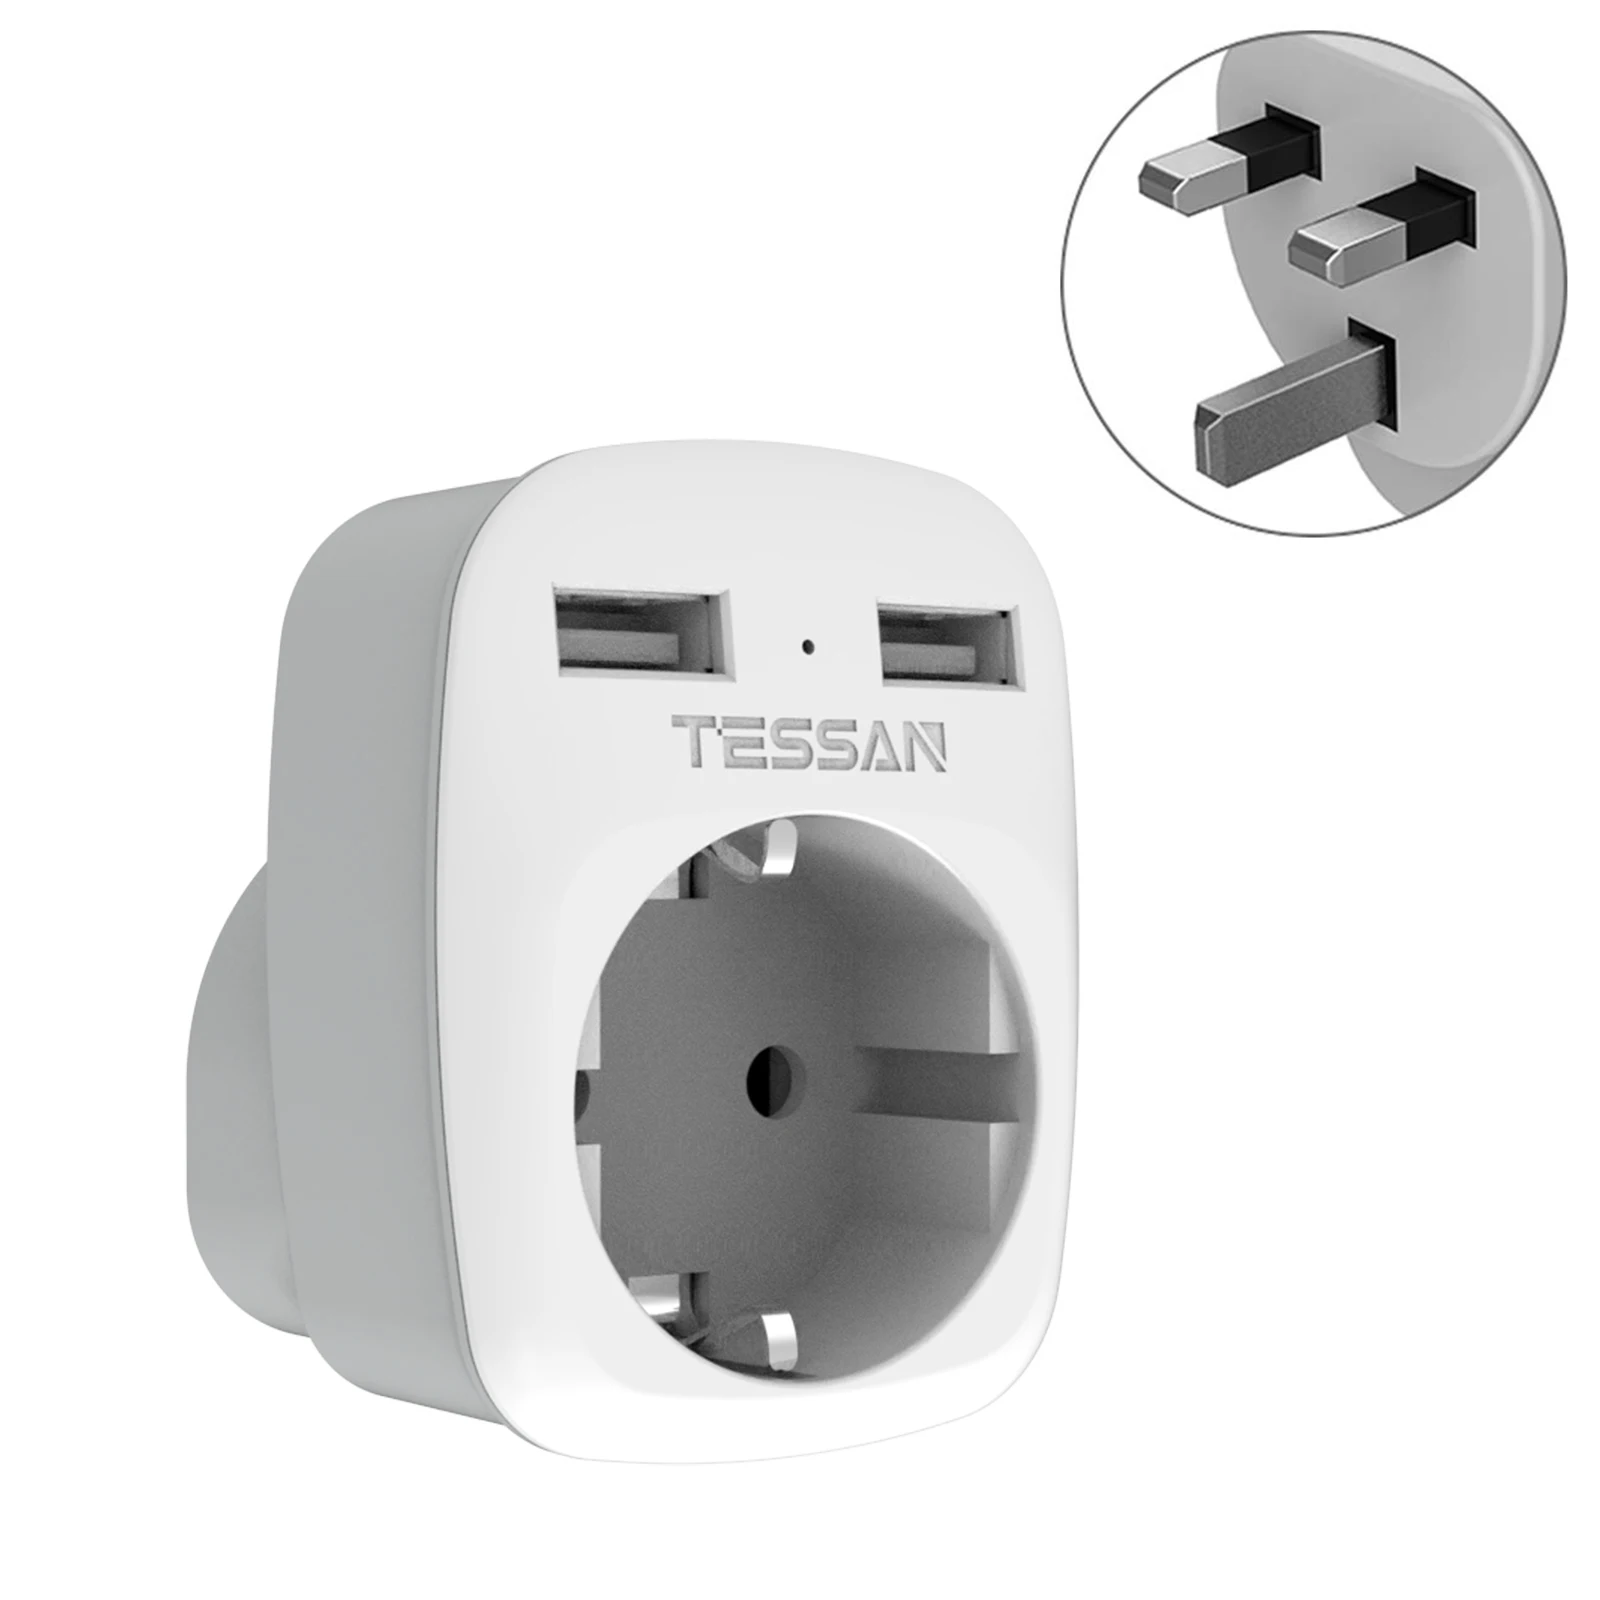 

TESSAN 3 in 1 UK Socket Travel Adapter with 2 USB Charging Ports (2.4A) and 1 AC Outlet, UK Wall Socket for Smartphone, Tablet